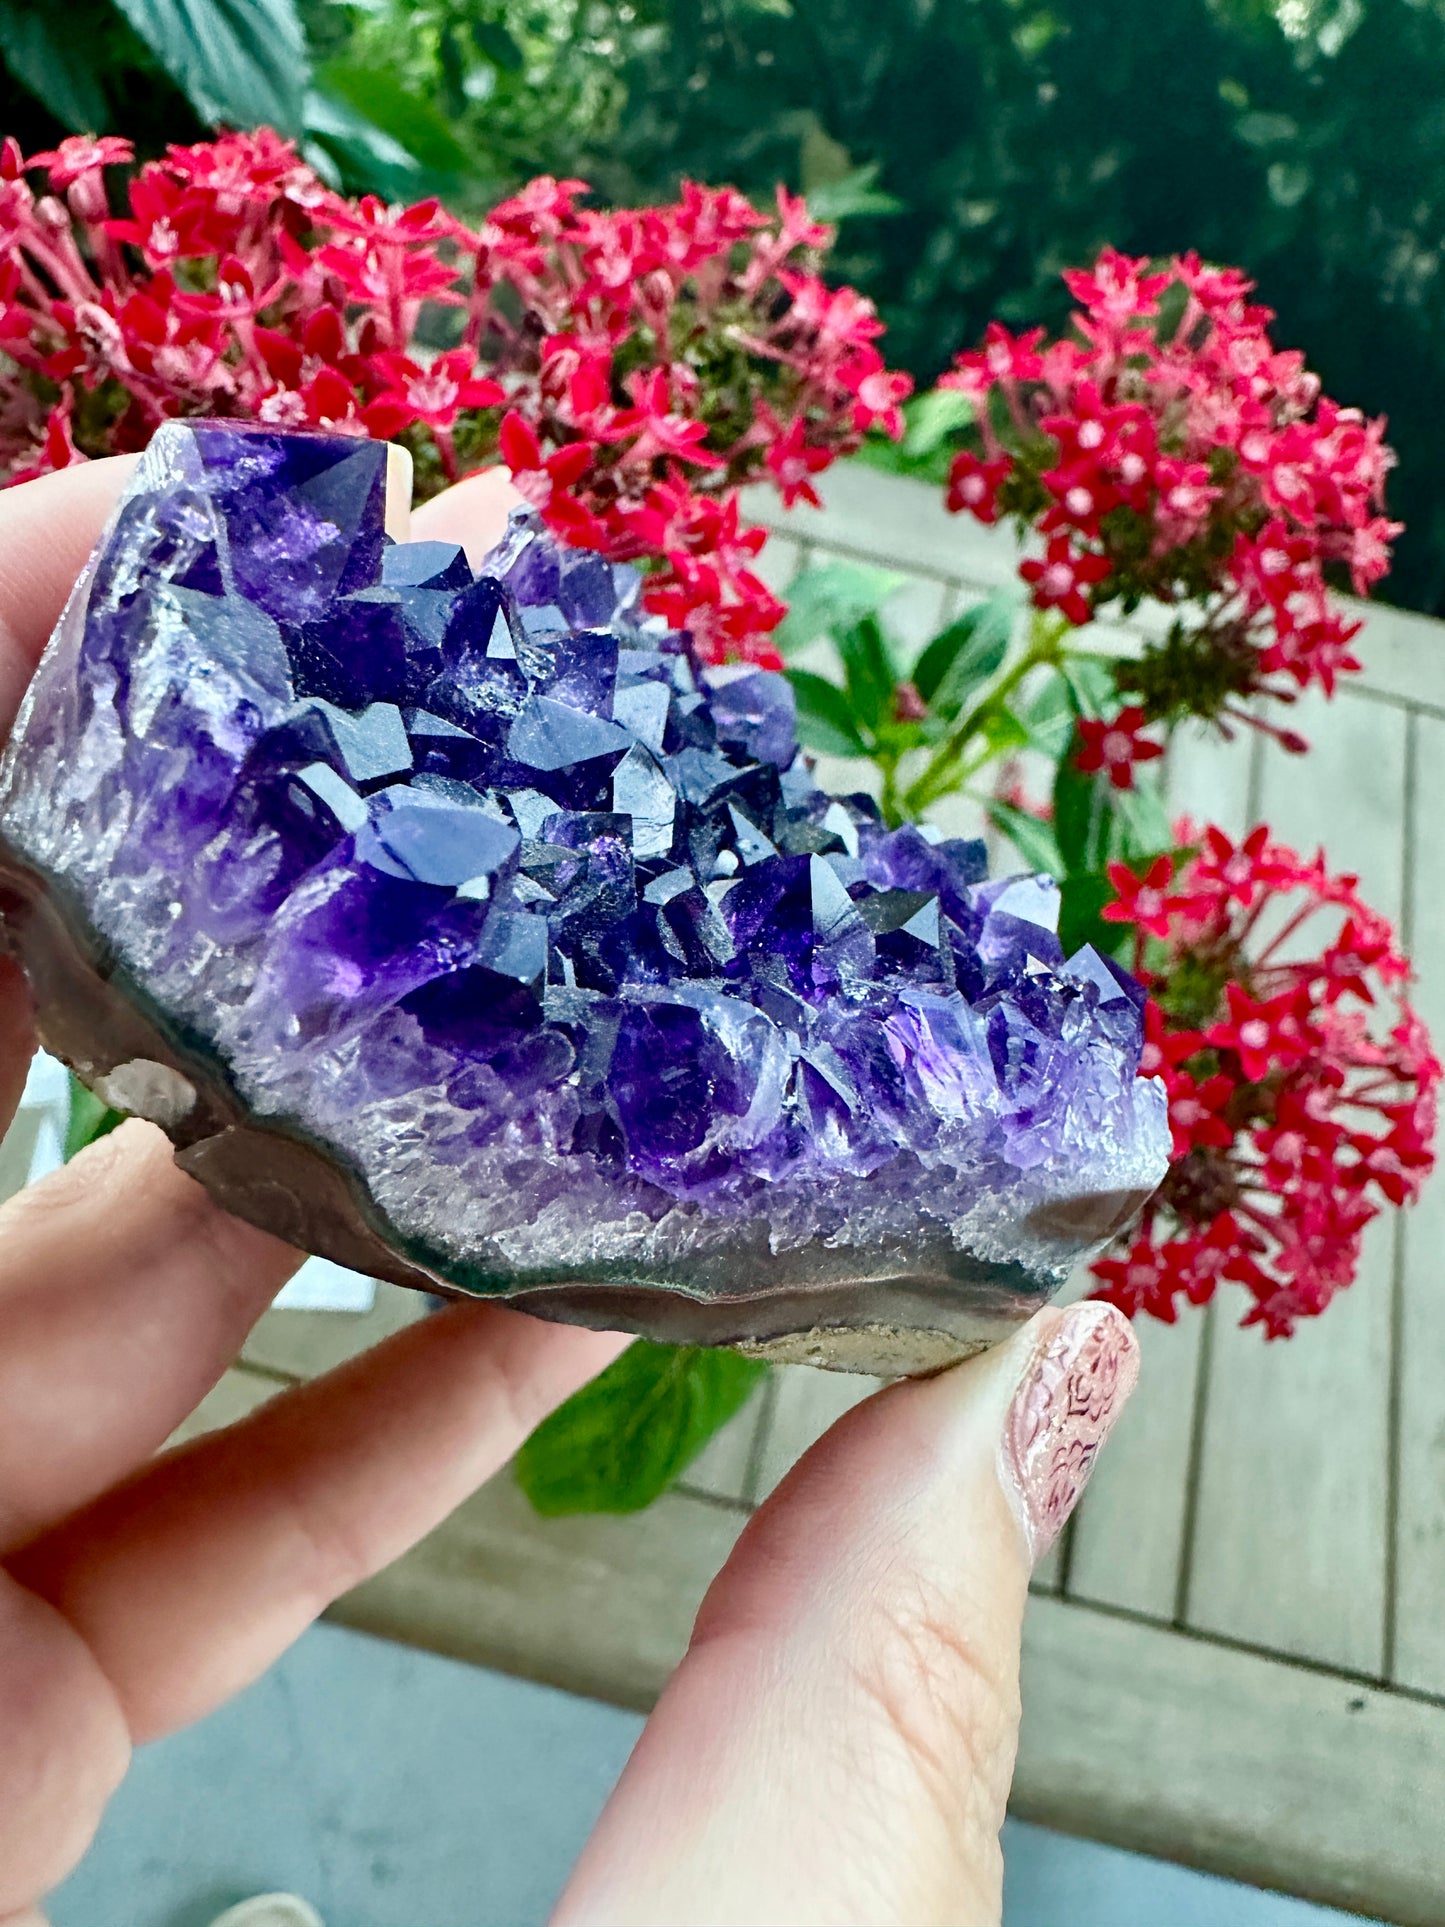 Exquisite Amethyst Druzy Heart from Uruguay - A Stunning Symbol of Love and Spiritual Growth, Perfect for Collectors and Home Decor